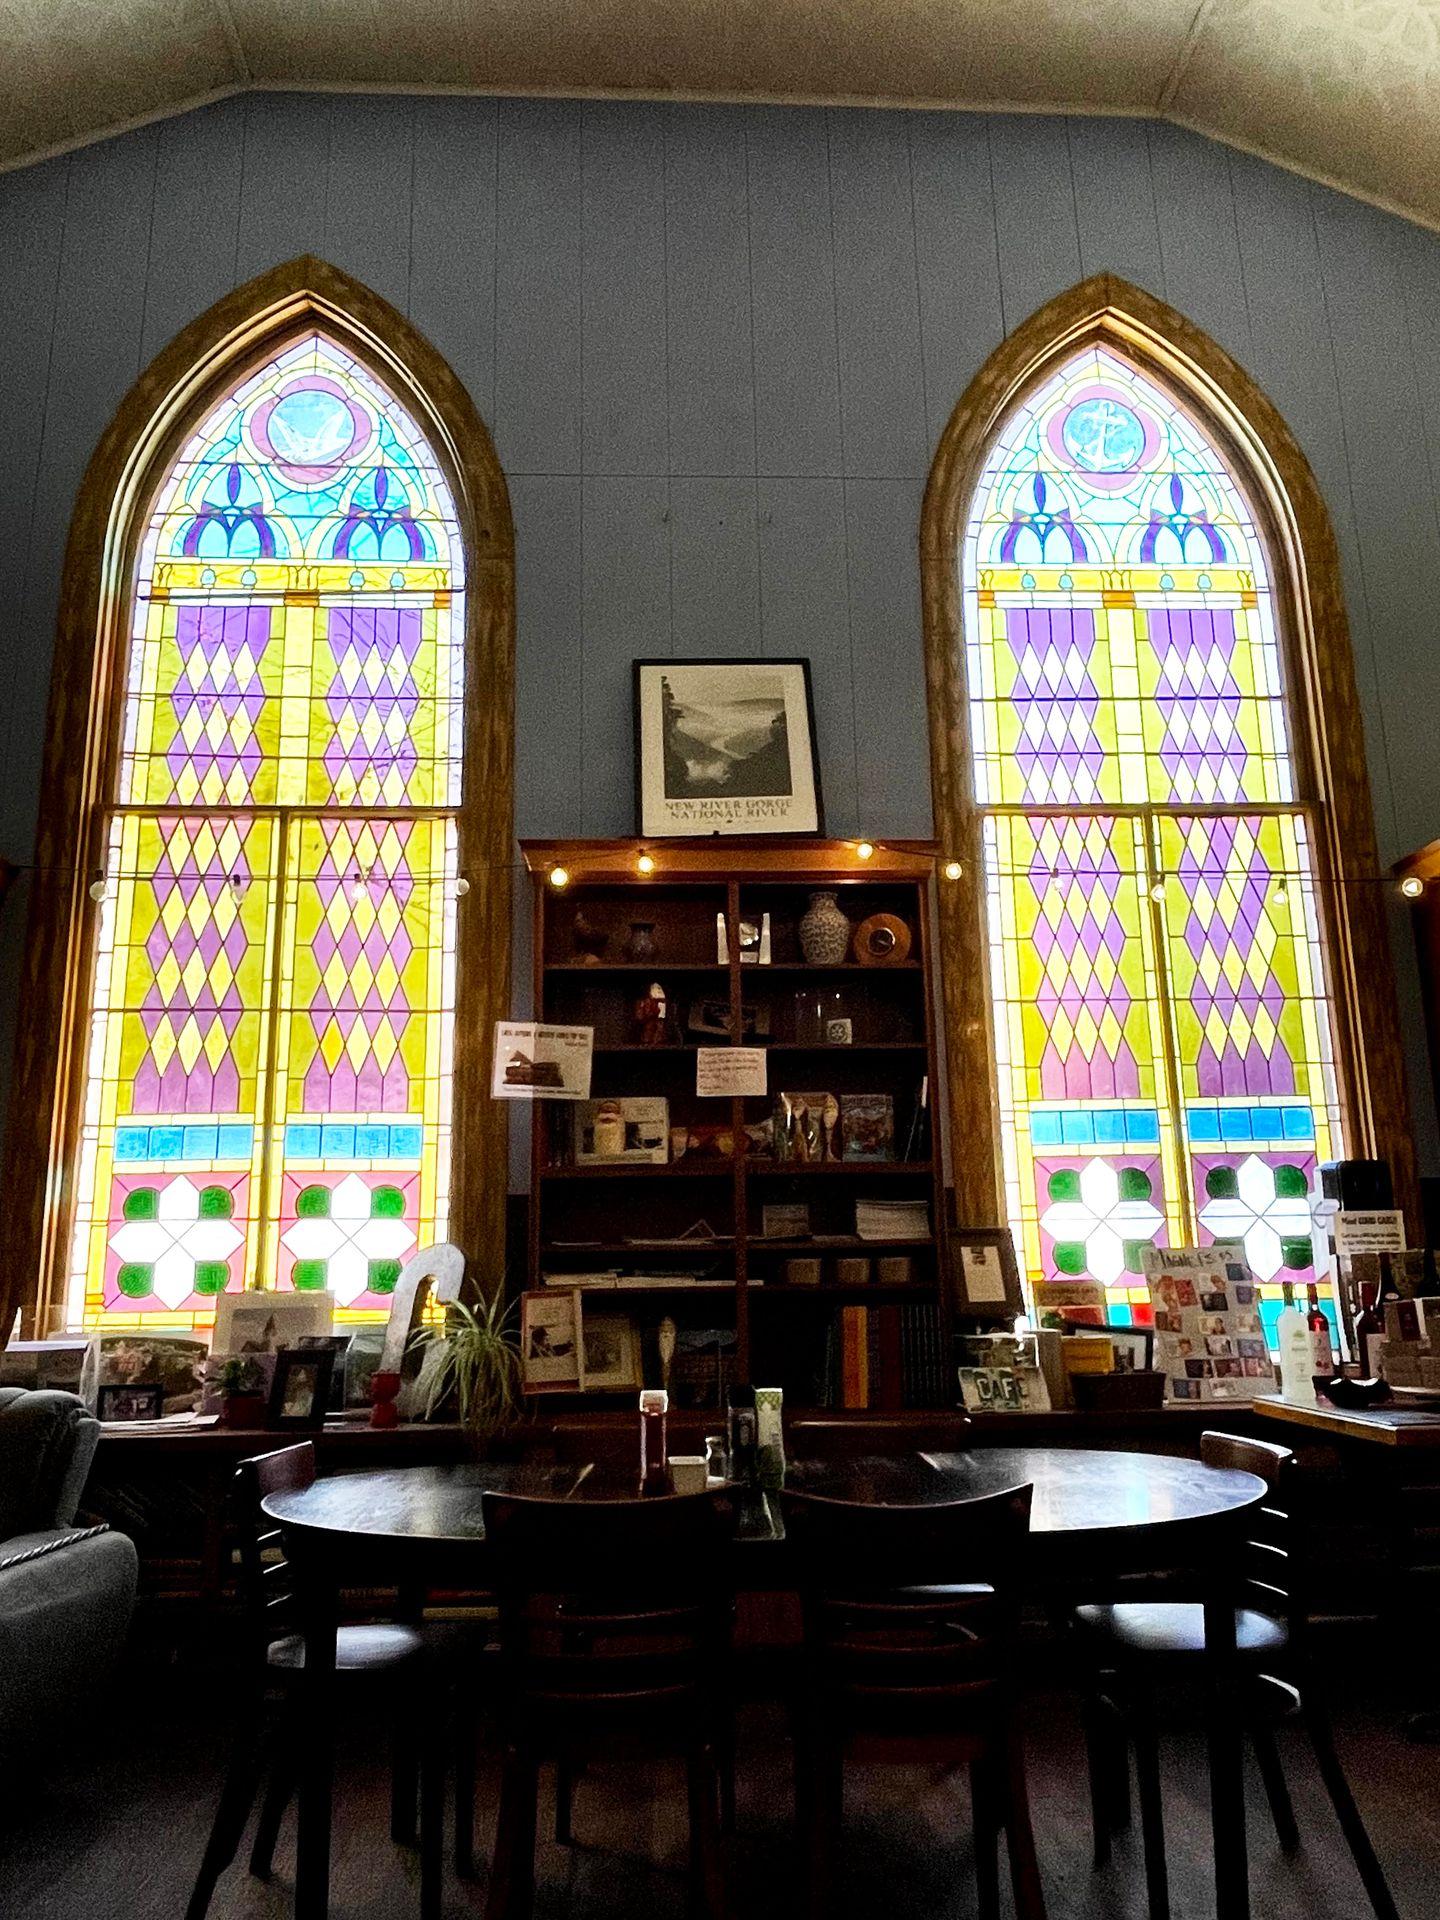 Stained glass windows inside the Cathedral Cafe.